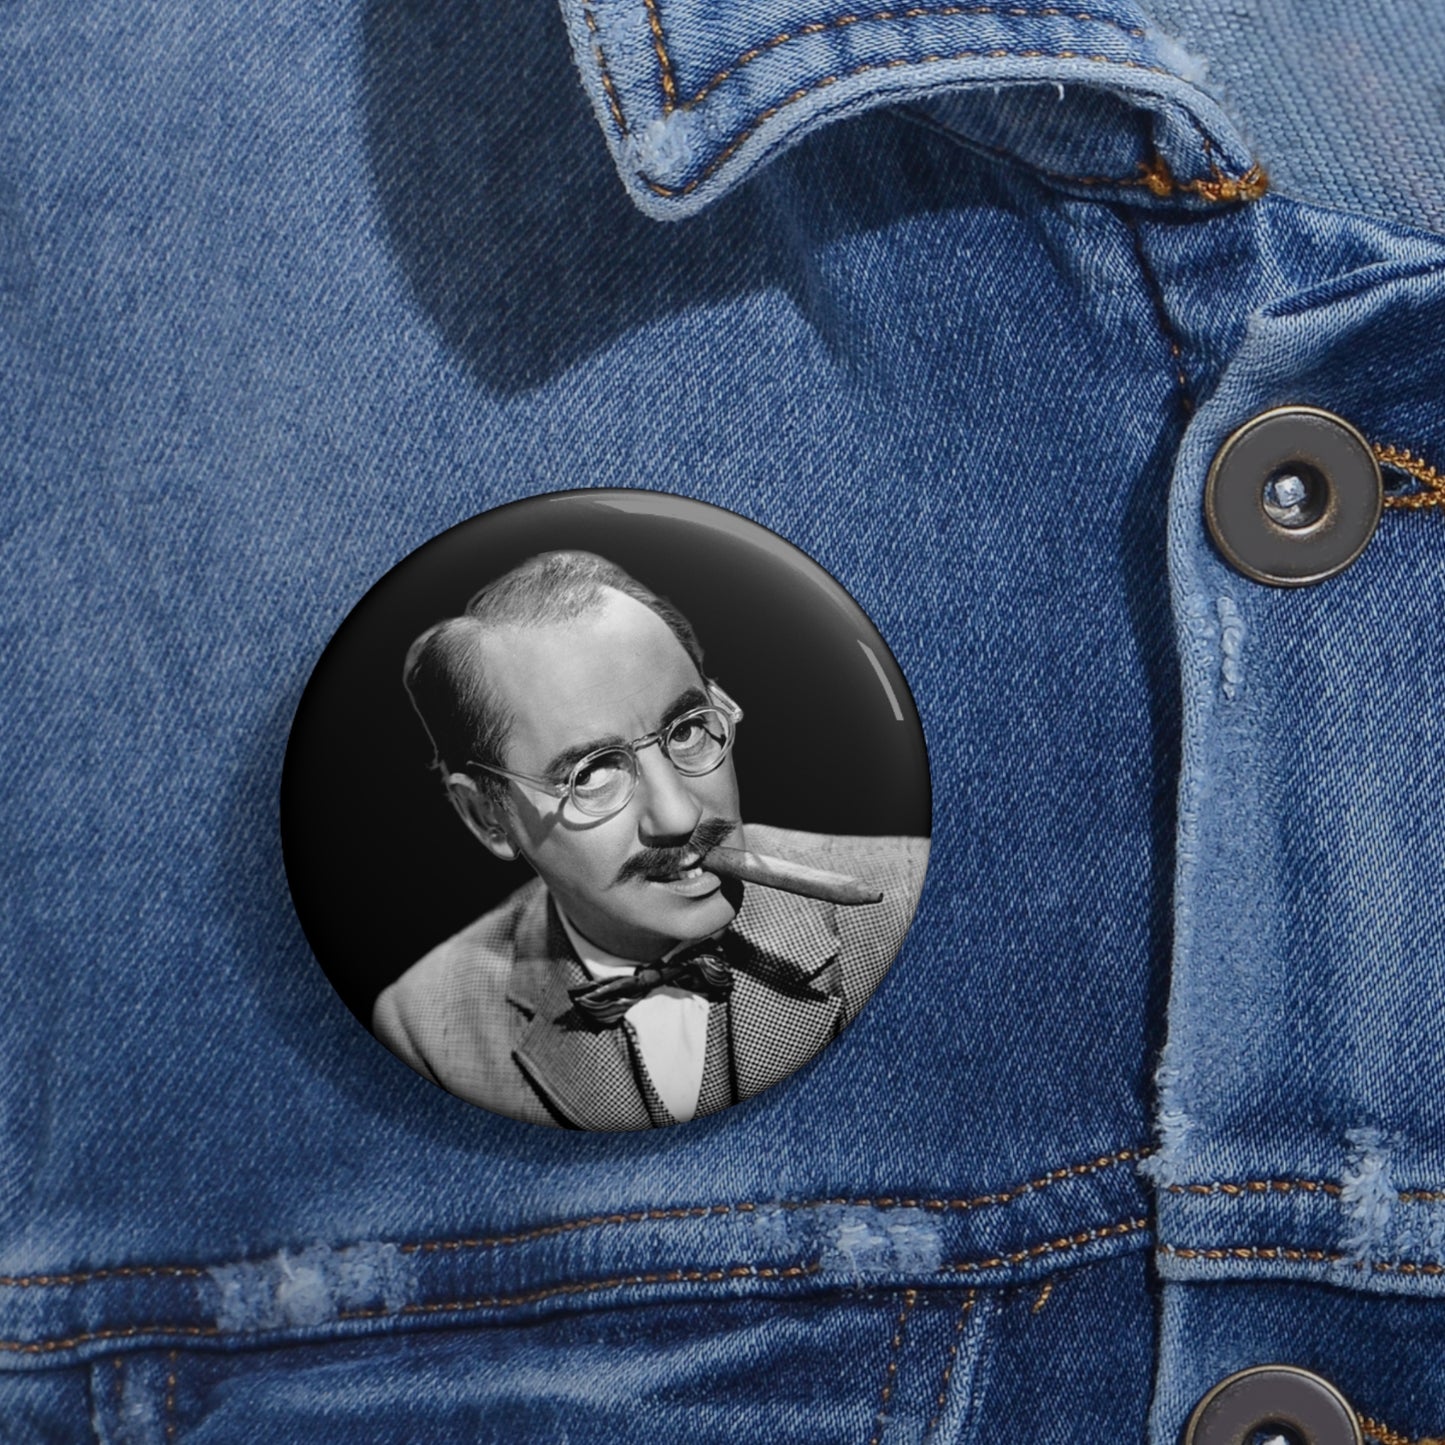 Groucho Marx Classic TV & Film Pin Buttons